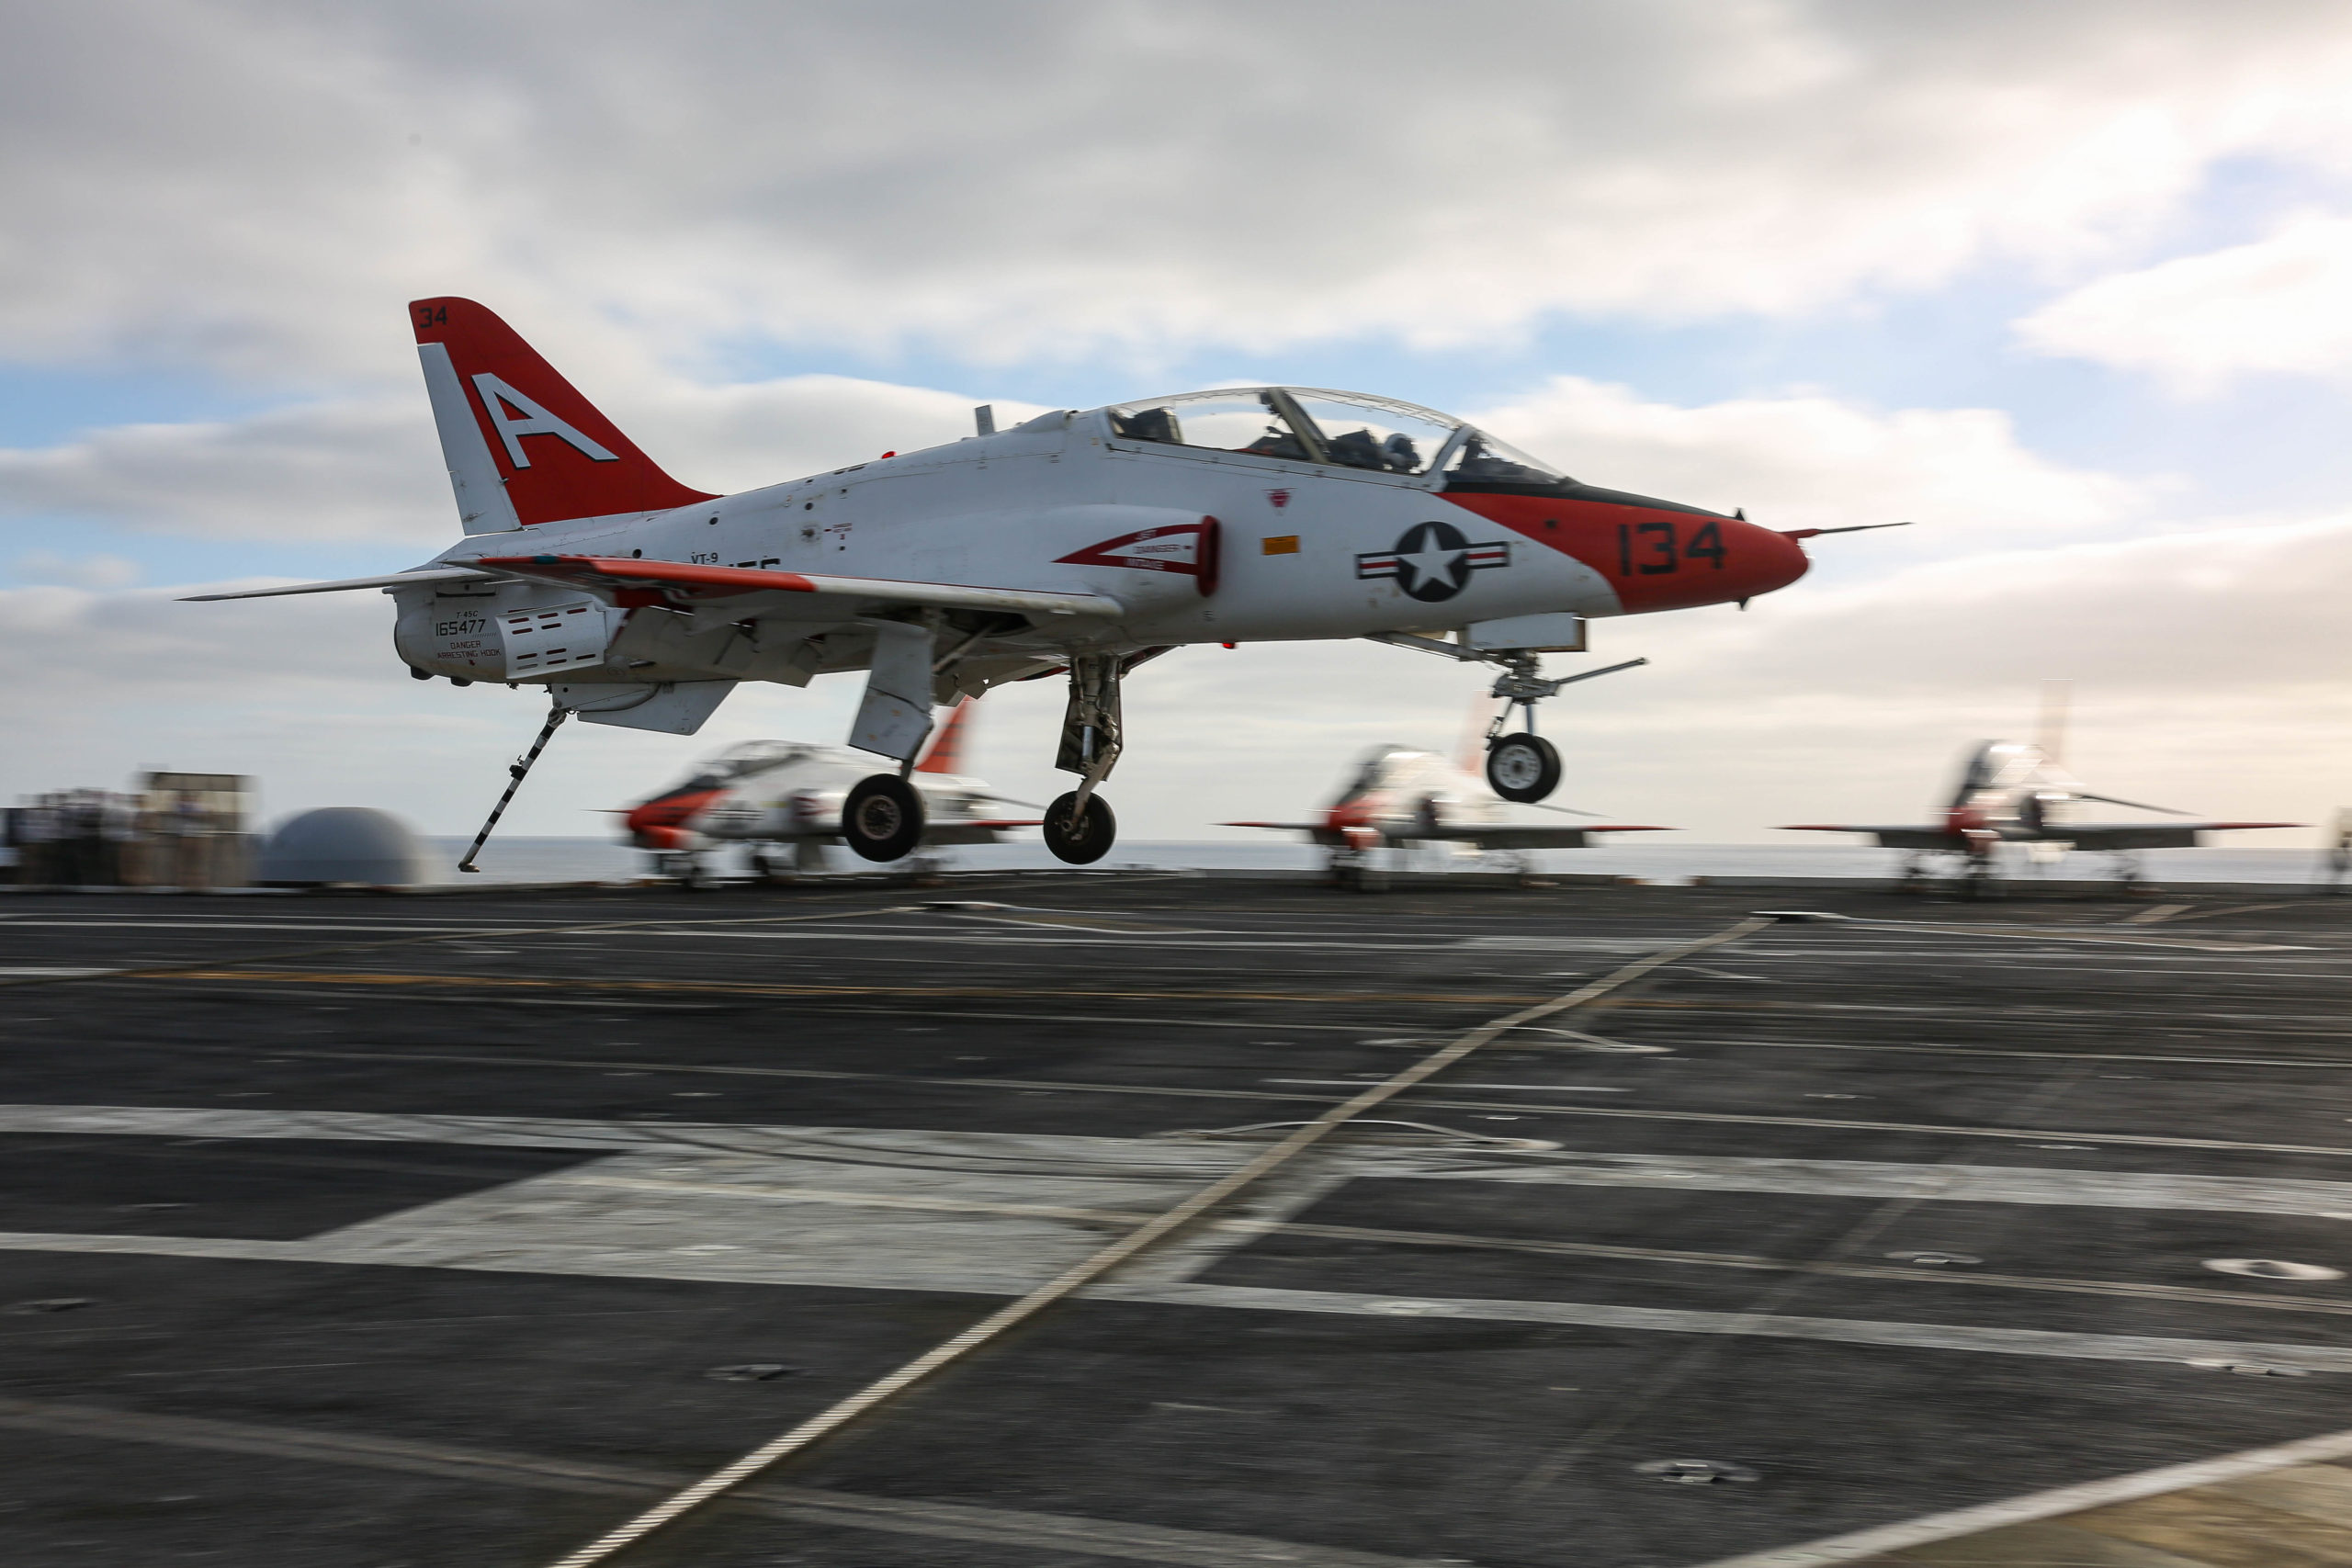 File:T-45C Goshawk taxies on the flight deck of the aircraft carrier USS  Abraham Lincoln (CVN-72) in the Atlantic Ocean on 4 May 2018  (180504-N-ME568-1353).JPG - Wikimedia Commons